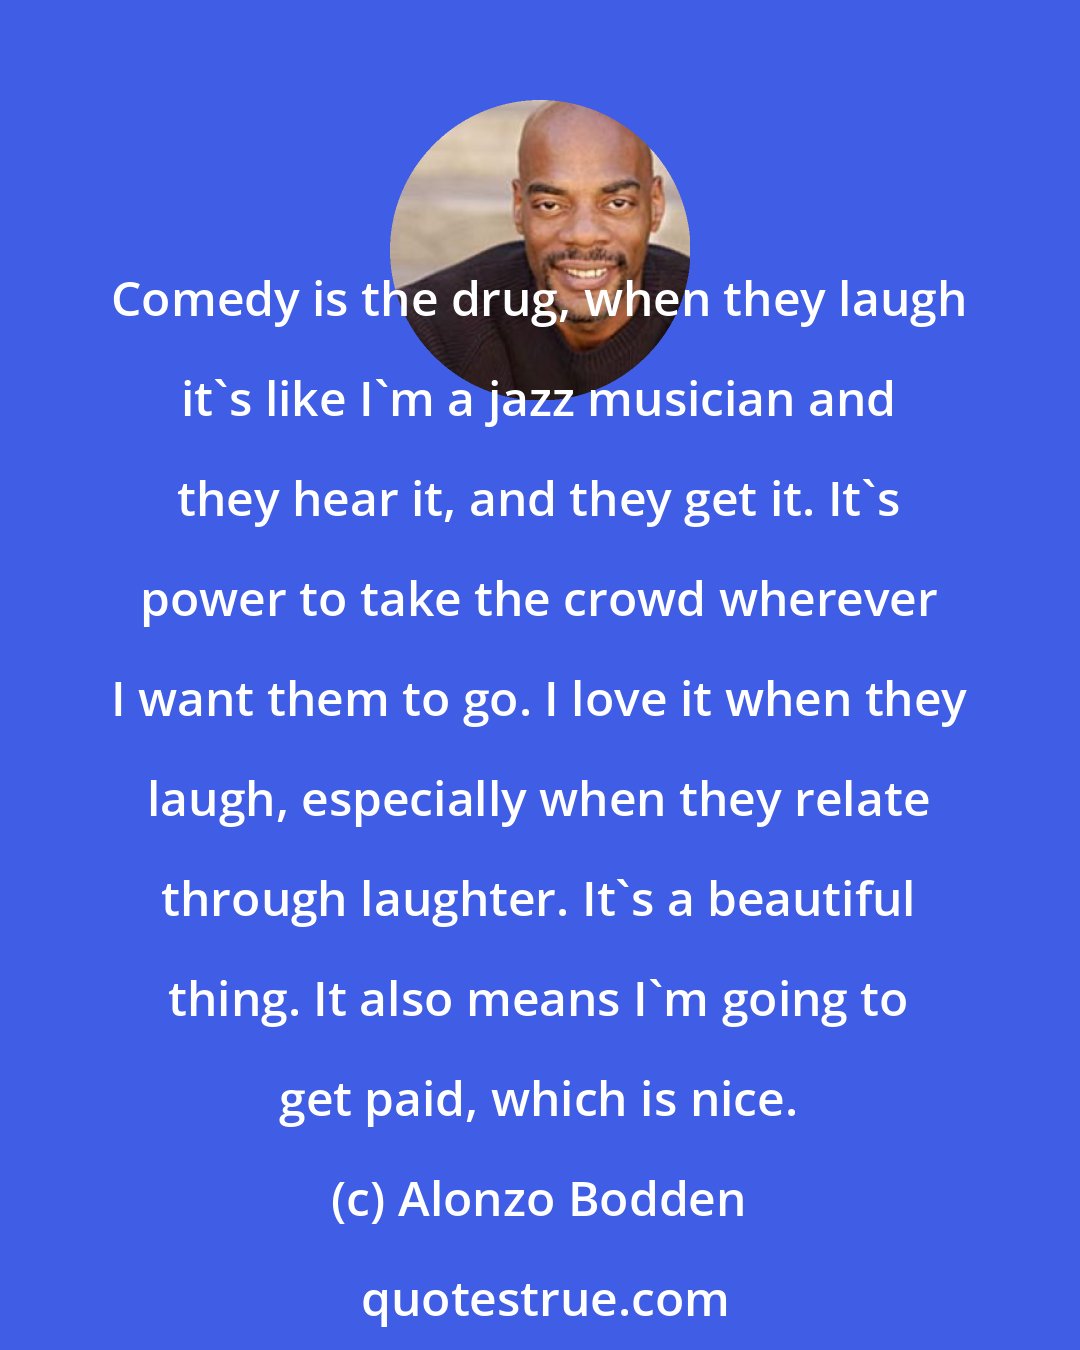 Alonzo Bodden: Comedy is the drug, when they laugh it's like I'm a jazz musician and they hear it, and they get it. It's power to take the crowd wherever I want them to go. I love it when they laugh, especially when they relate through laughter. It's a beautiful thing. It also means I'm going to get paid, which is nice.